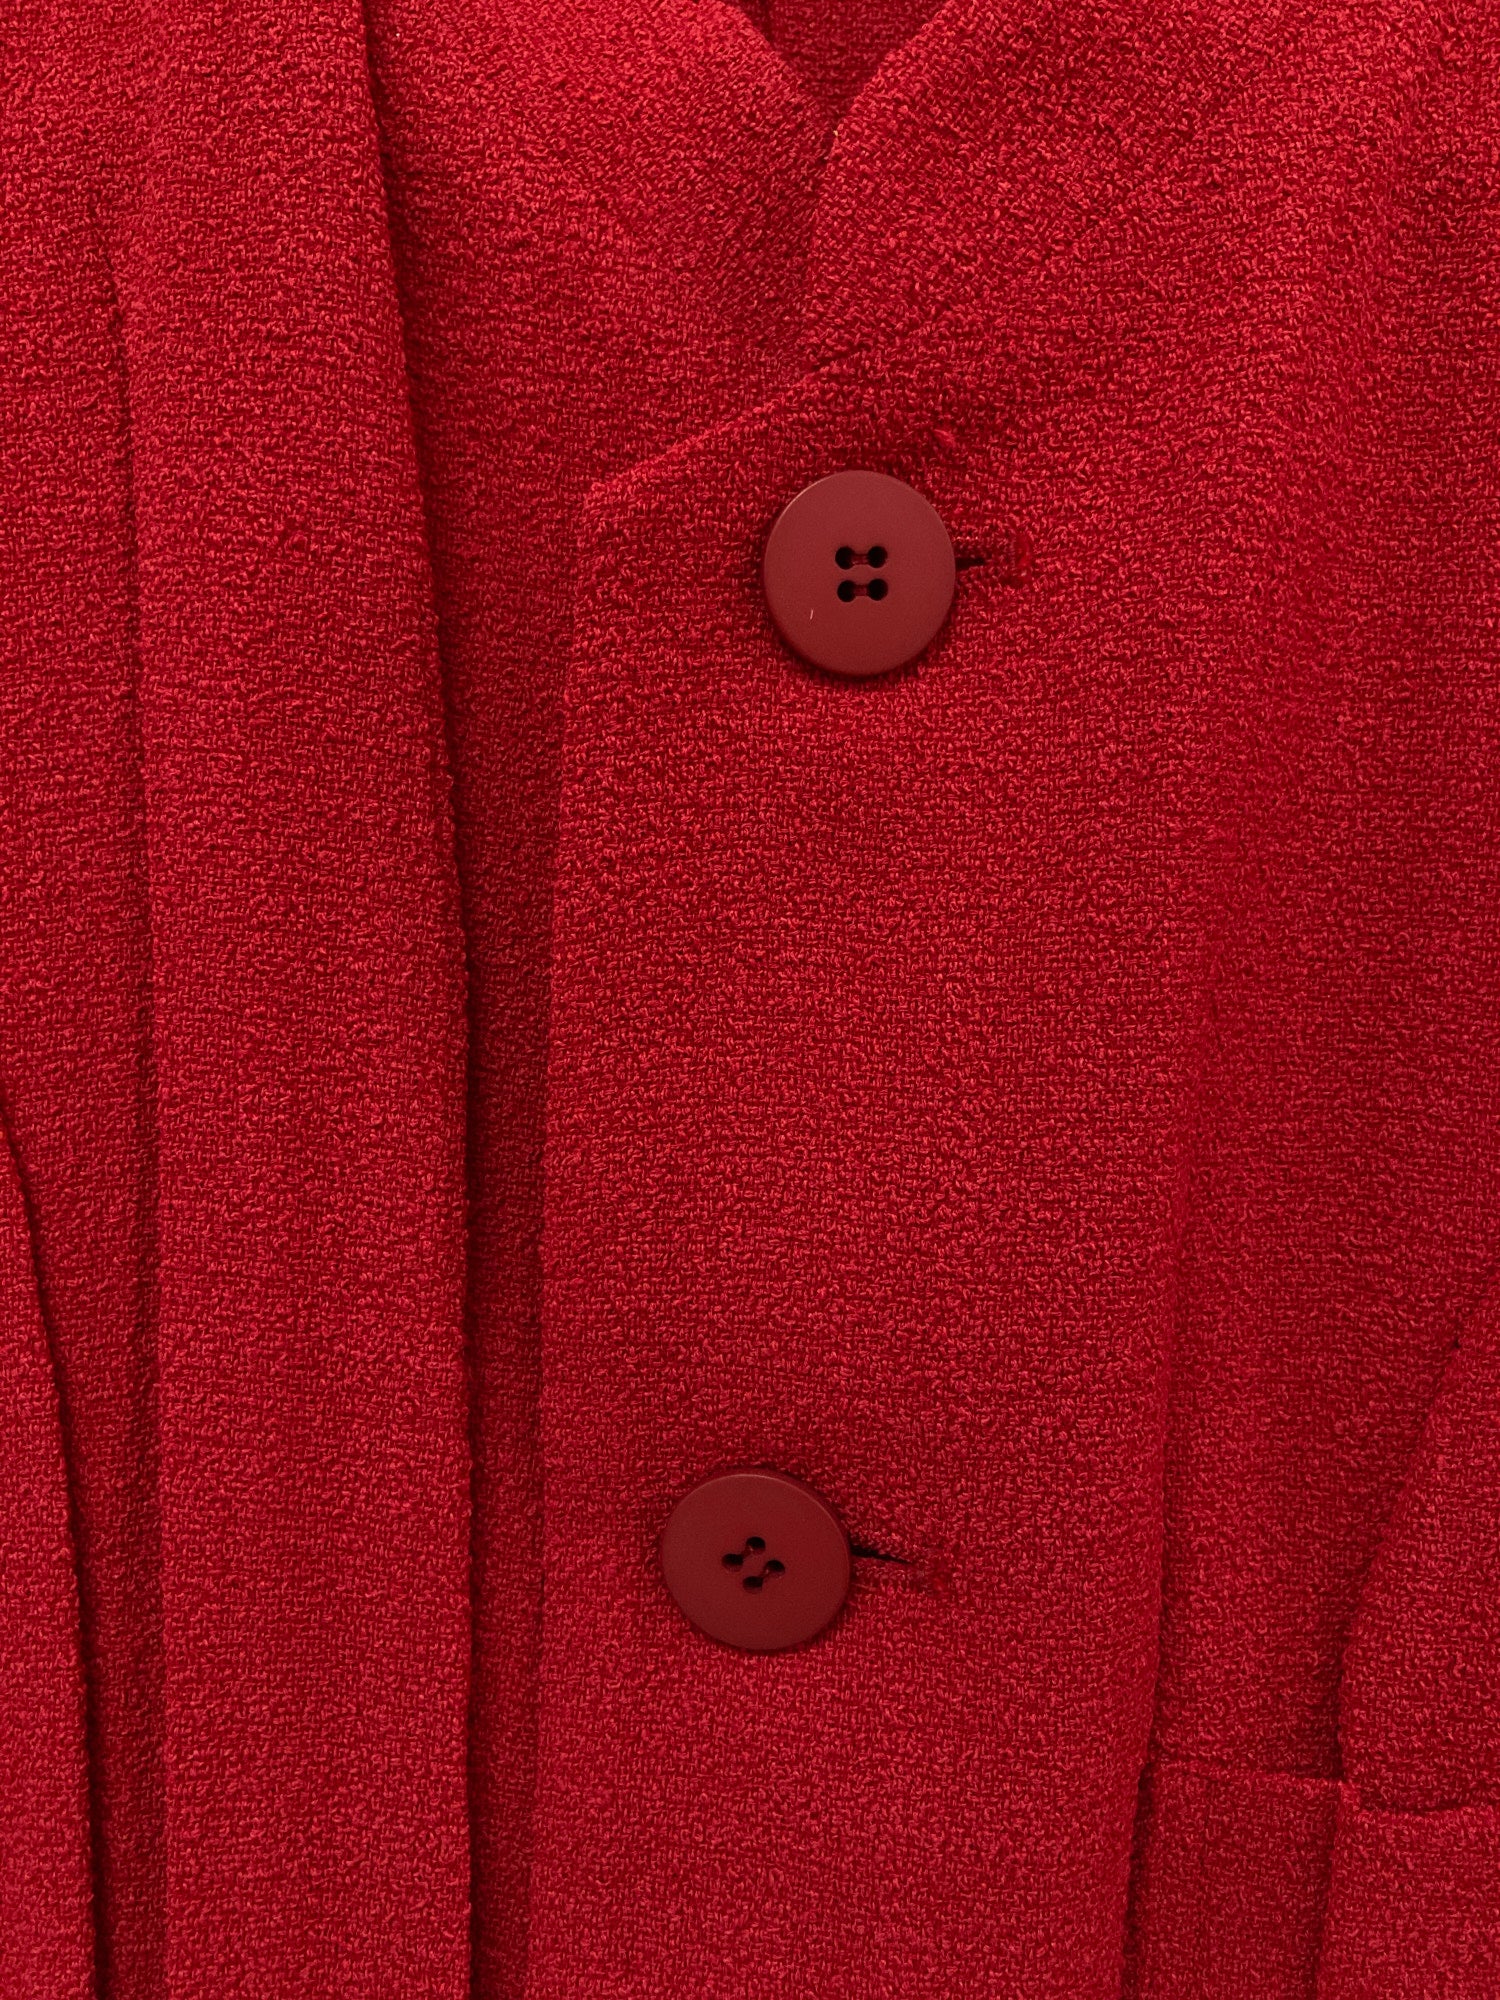 Issey Miyake red creased polyester 5 button stand collar blazer - size M L